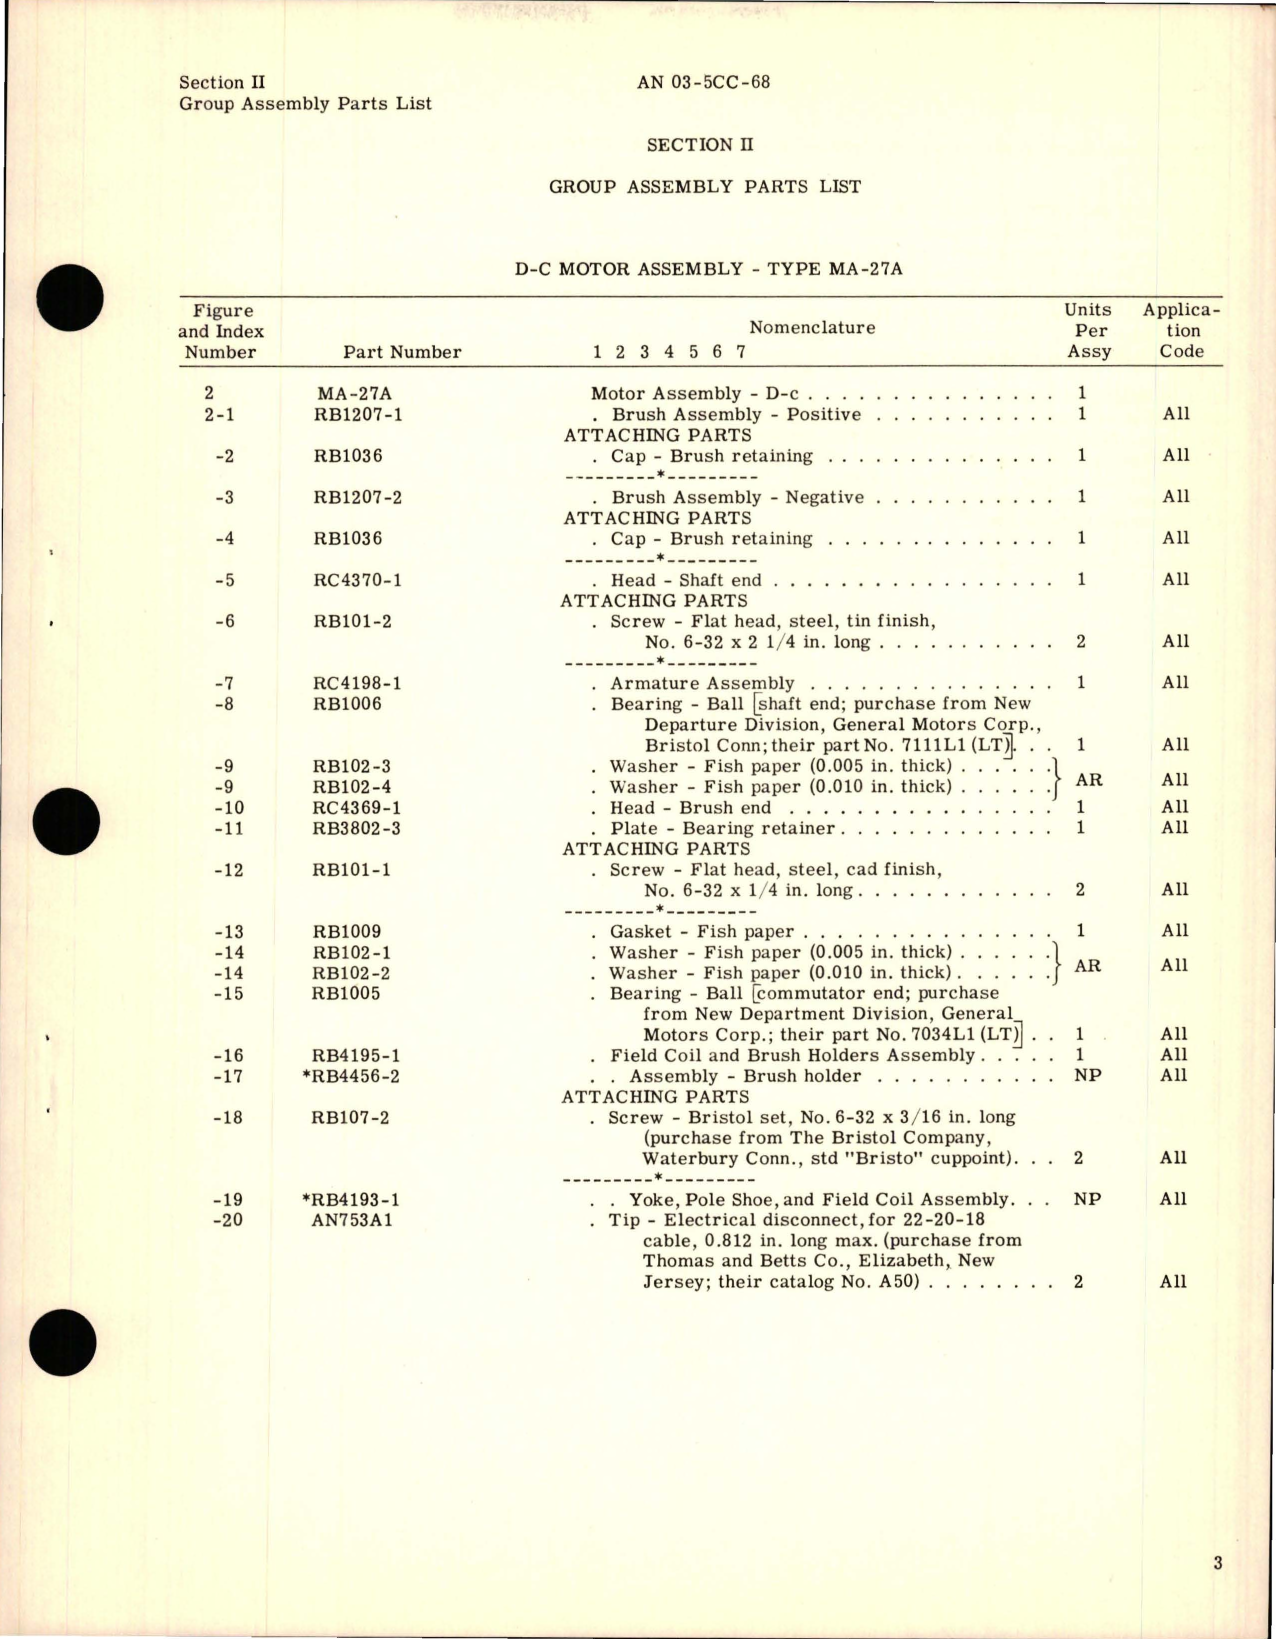 Sample page 5 from AirCorps Library document: Parts Catalog for D-C Motors - Model MA-27A